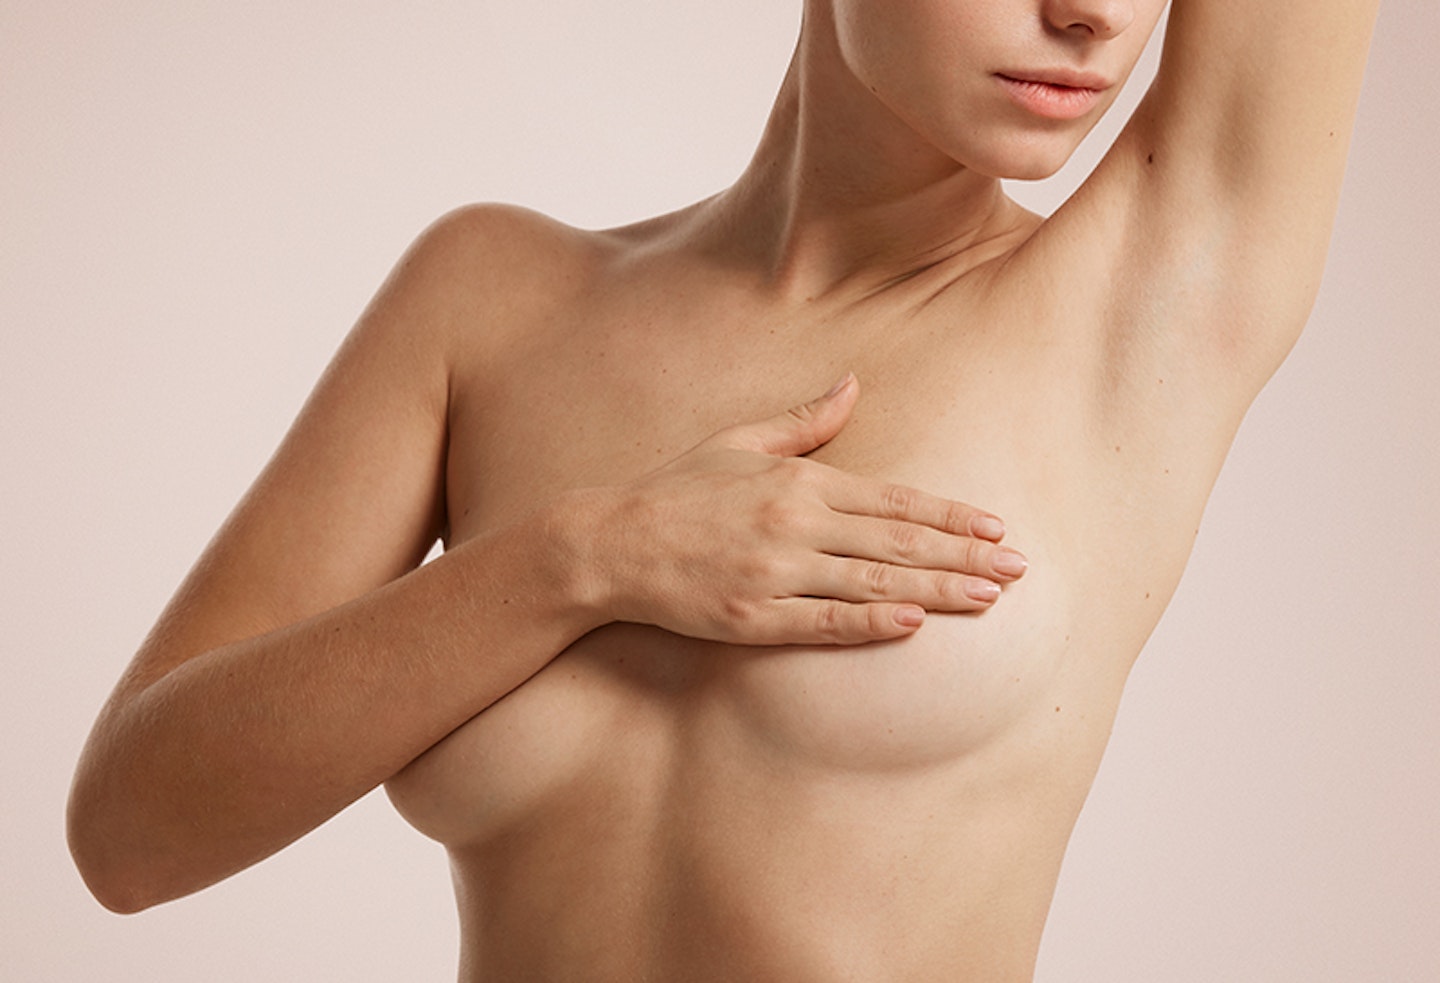 How can you fix a protruding nipple? Ask the Expert